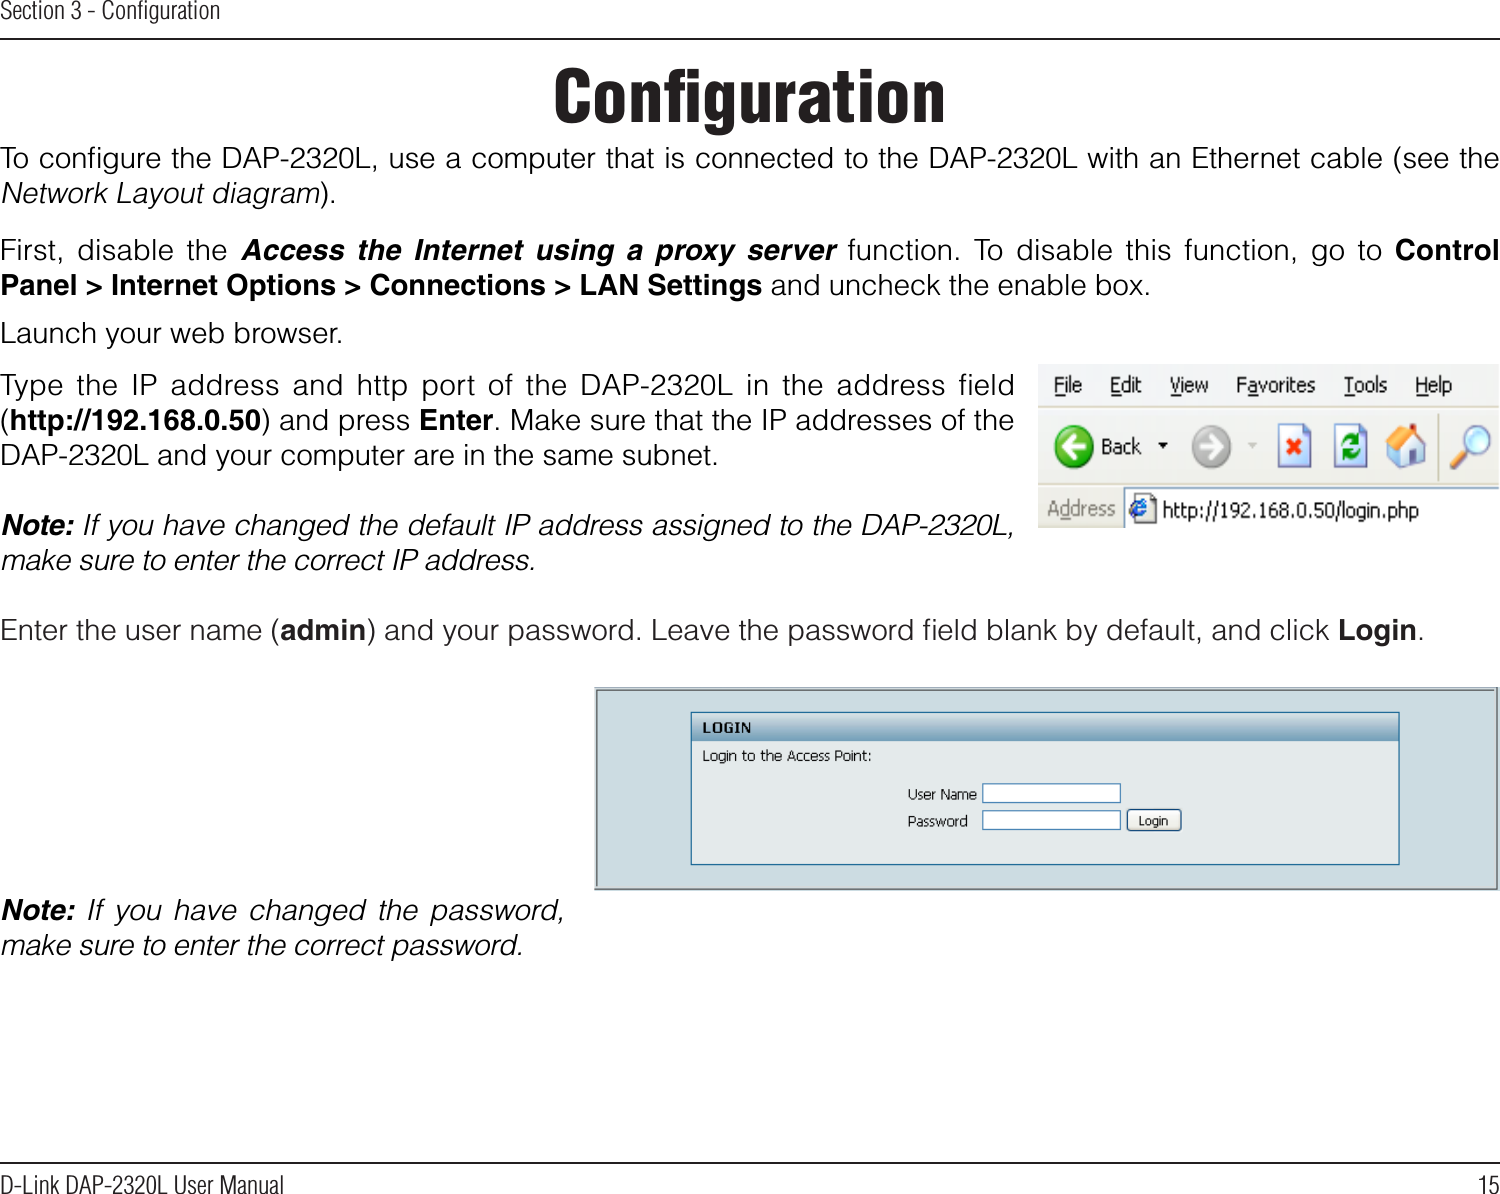 15D-Link DAP-2320L User ManualSection 3 - ConﬁgurationConﬁgurationTo conﬁgure the DAP-2320L, use a computer that is connected to the DAP-2320L with an Ethernet cable (see the Network Layout diagram).First,  disable  the  Access  the  Internet  using  a  proxy  server function.  To  disable  this  function,  go  to Control Panel &gt; Internet Options &gt; Connections &gt; LAN Settings and uncheck the enable box.  Launch your web browser. Type  the  IP  address  and  http  port  of  the  DAP-2320L  in  the  address  ﬁeld (http://192.168.0.50) and press Enter. Make sure that the IP addresses of the DAP-2320L and your computer are in the same subnet.Note: If you have changed the default IP address assigned to the DAP-2320L, make sure to enter the correct IP address. Enter the user name (admin) and your password. Leave the password ﬁeld blank by default, and click Login.Note:  If  you  have  changed  the  password, make sure to enter the correct password.